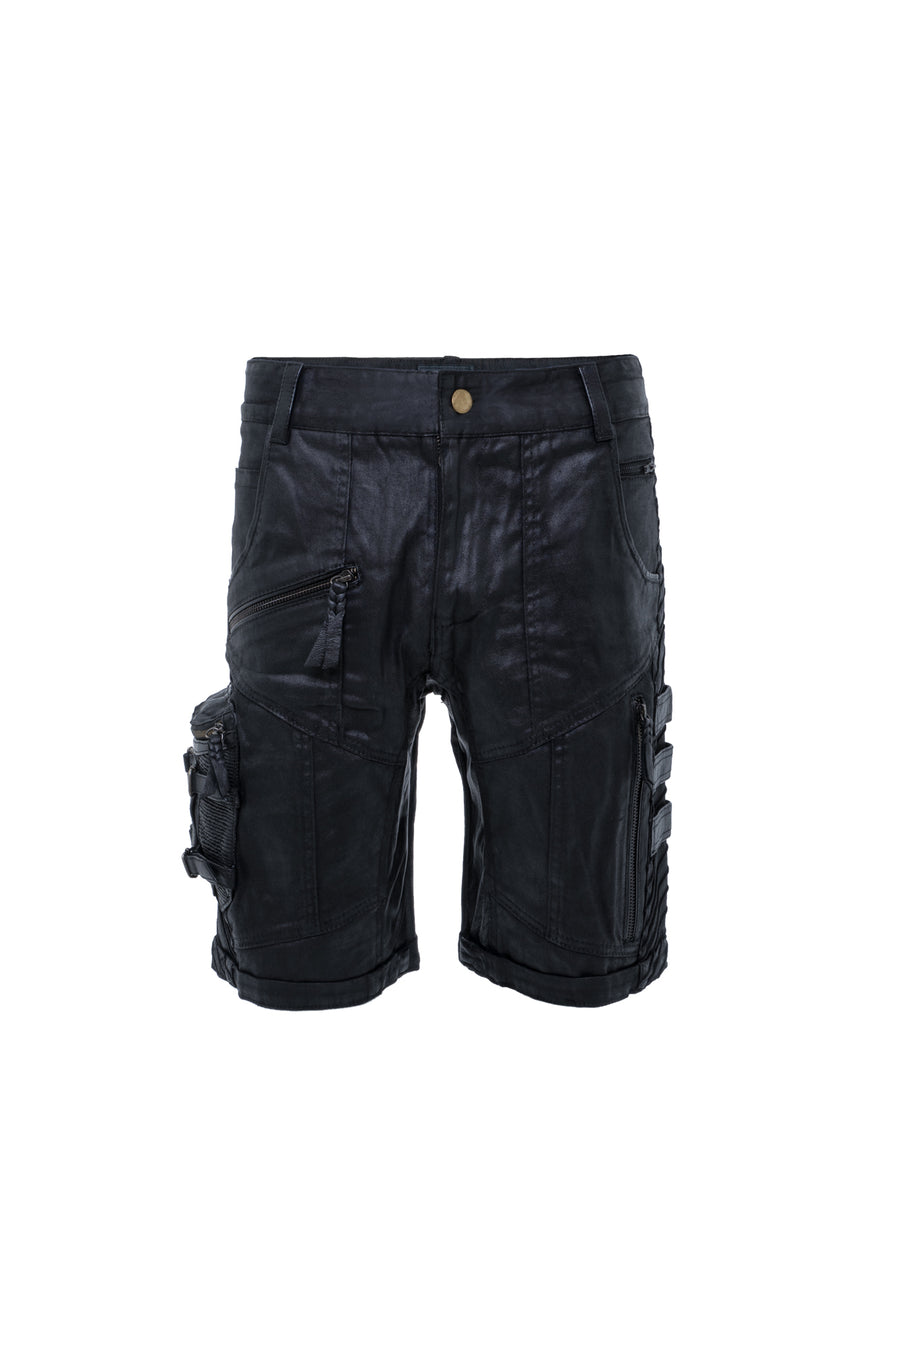 mens waxed textured tactical cargo shorts multiple utility pockets